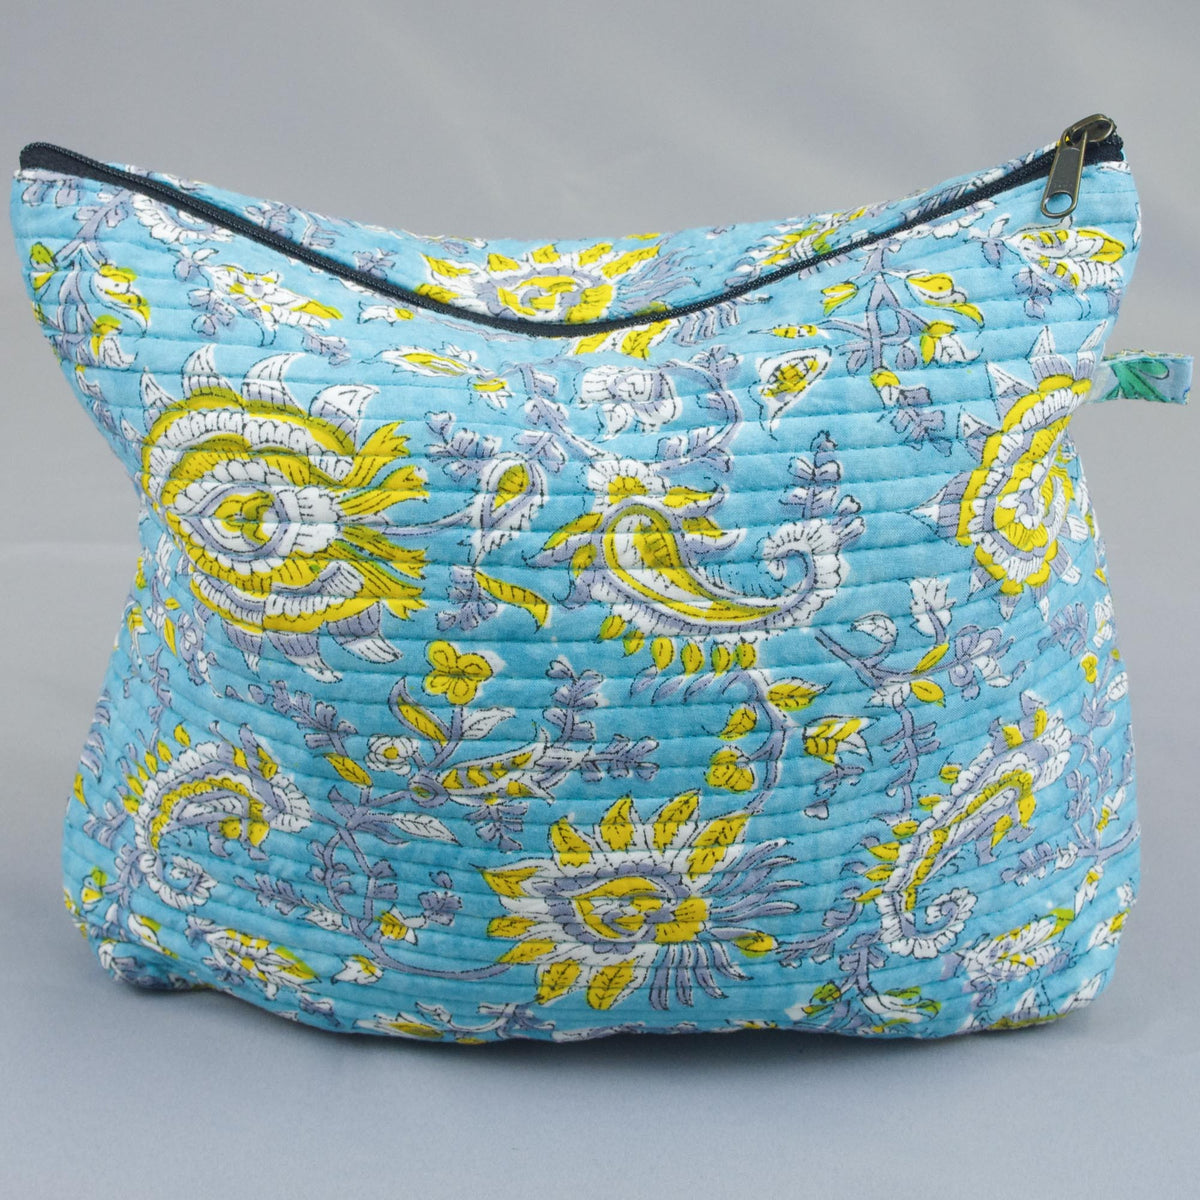 Square Shape Quilted Toiletry Bag - Blue Yellow Paisley